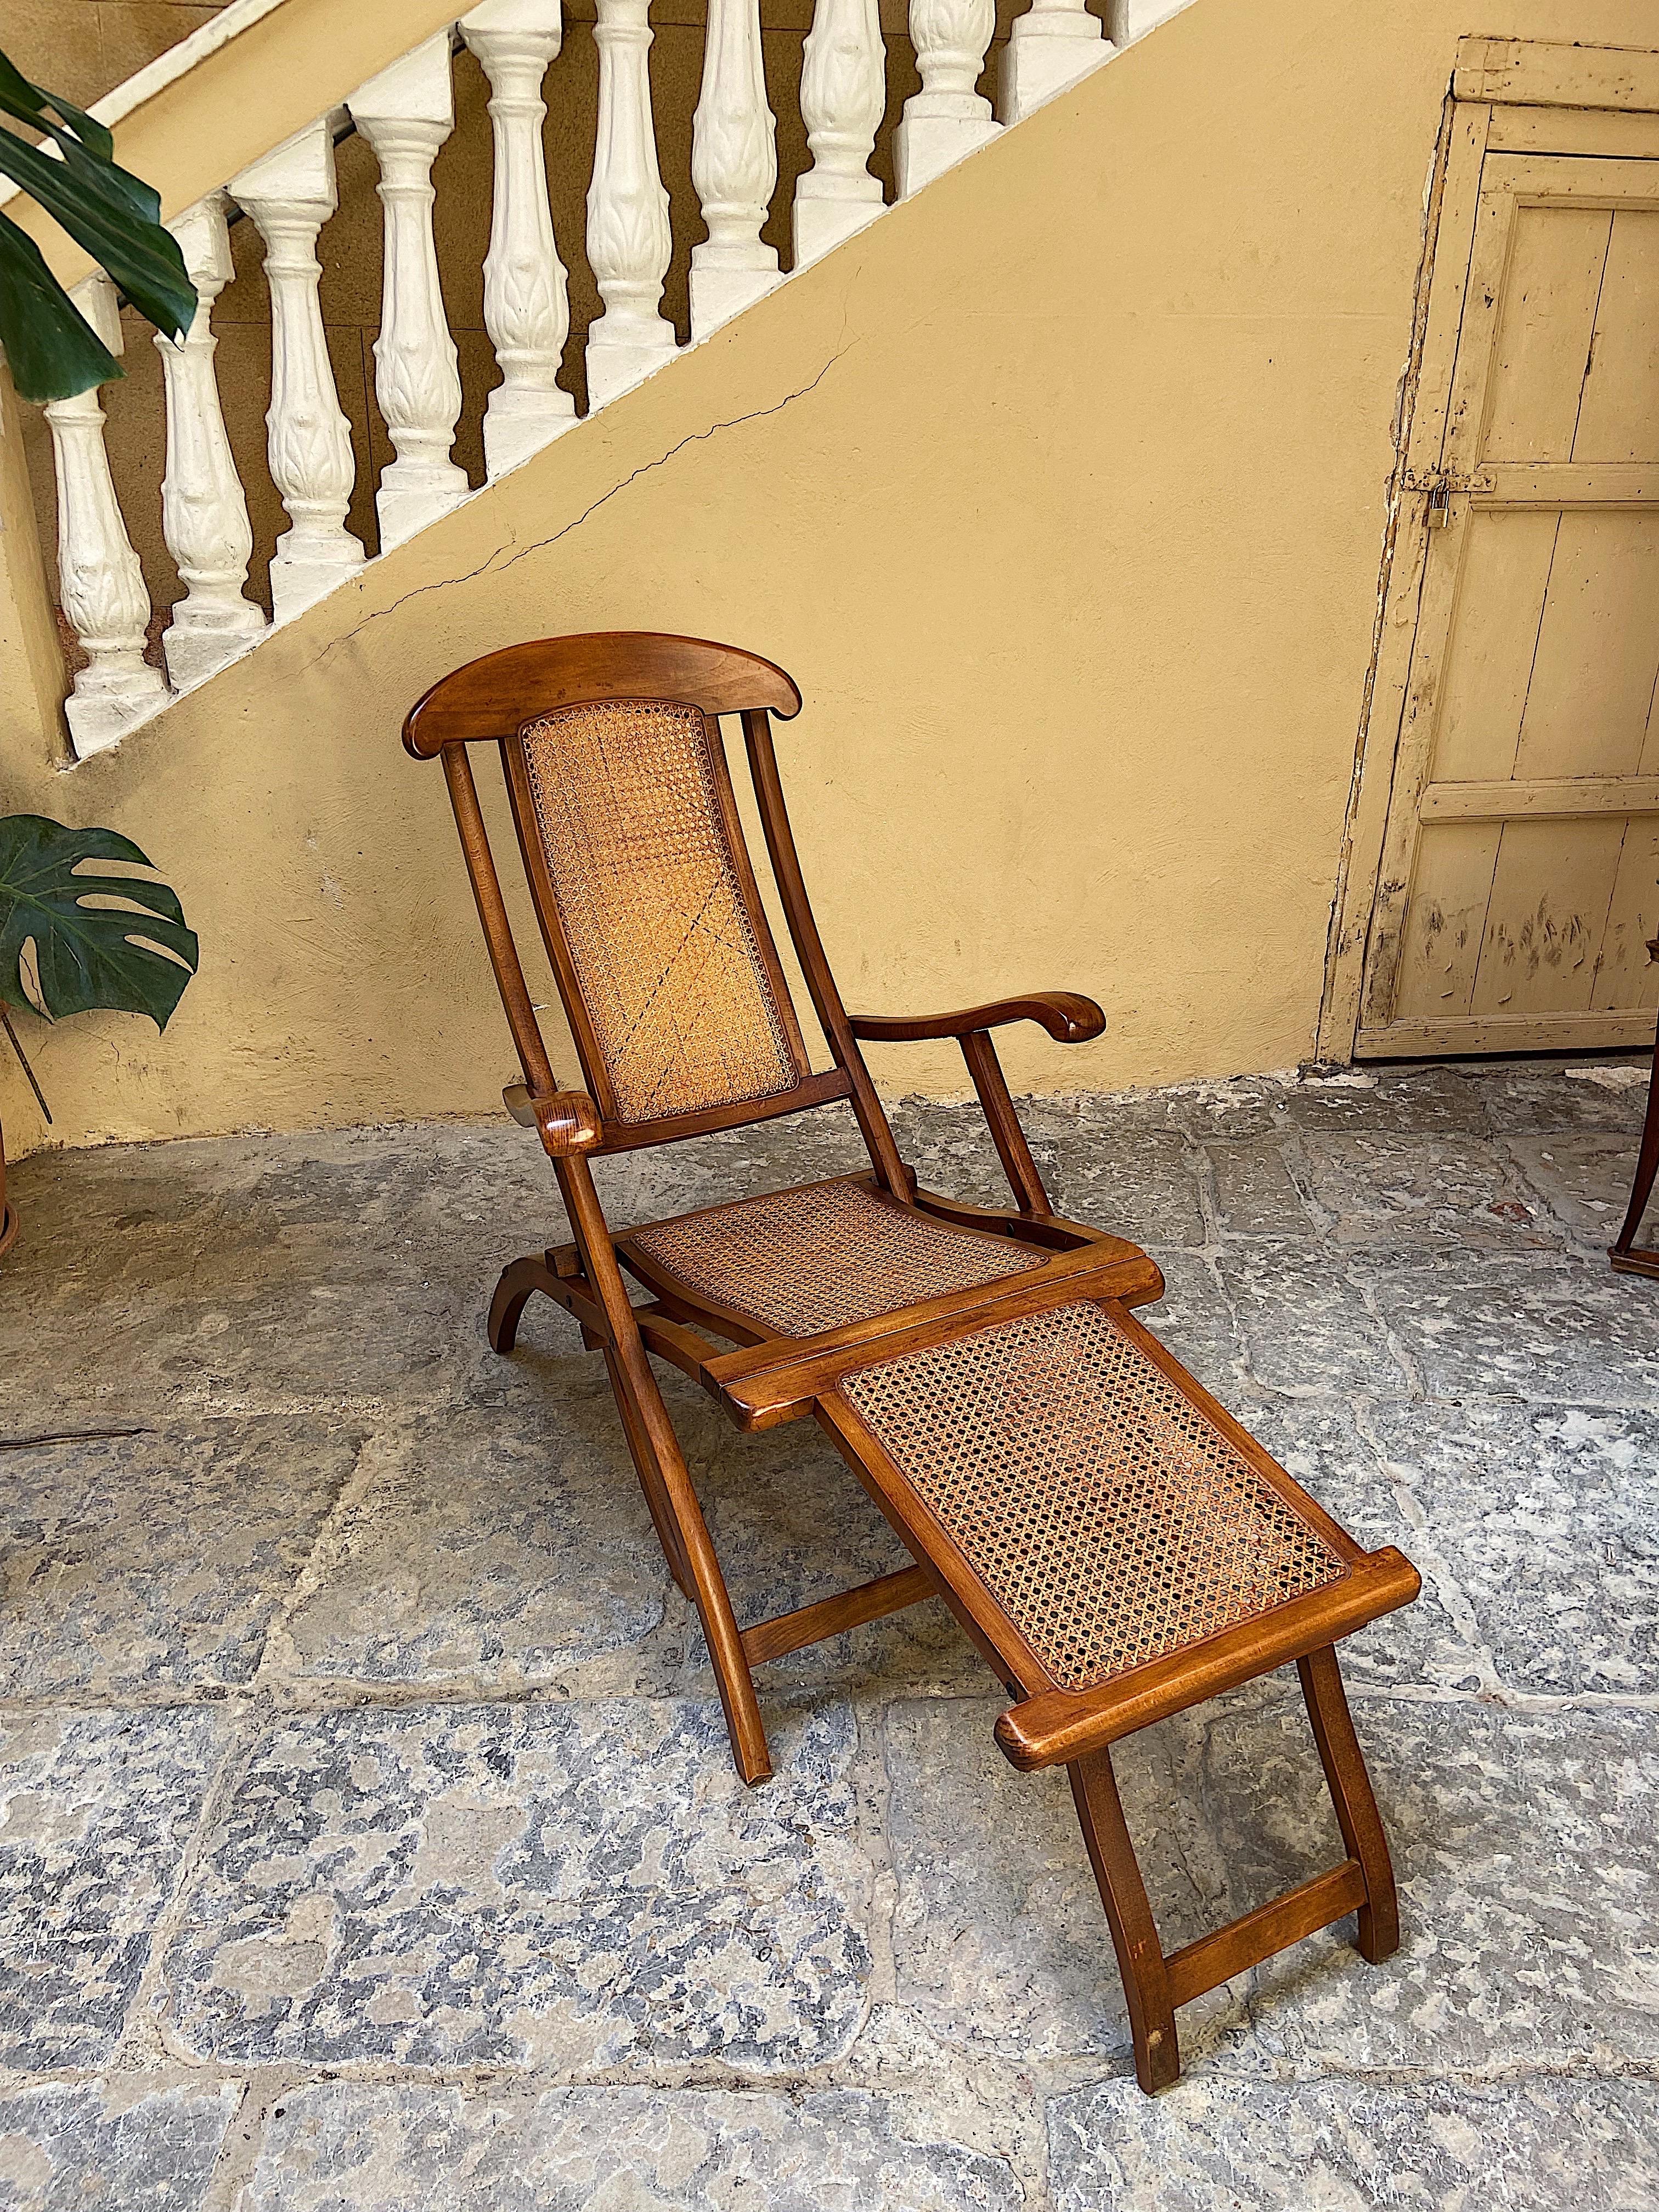 Elegant walnut framed folding steamer deck chair. The shape of this chair is more than elegant. Its very comfortable. This was first designed in the 1930s but this version was made 1970. Framed in walnut with cane work on back and seat. Soft shaped